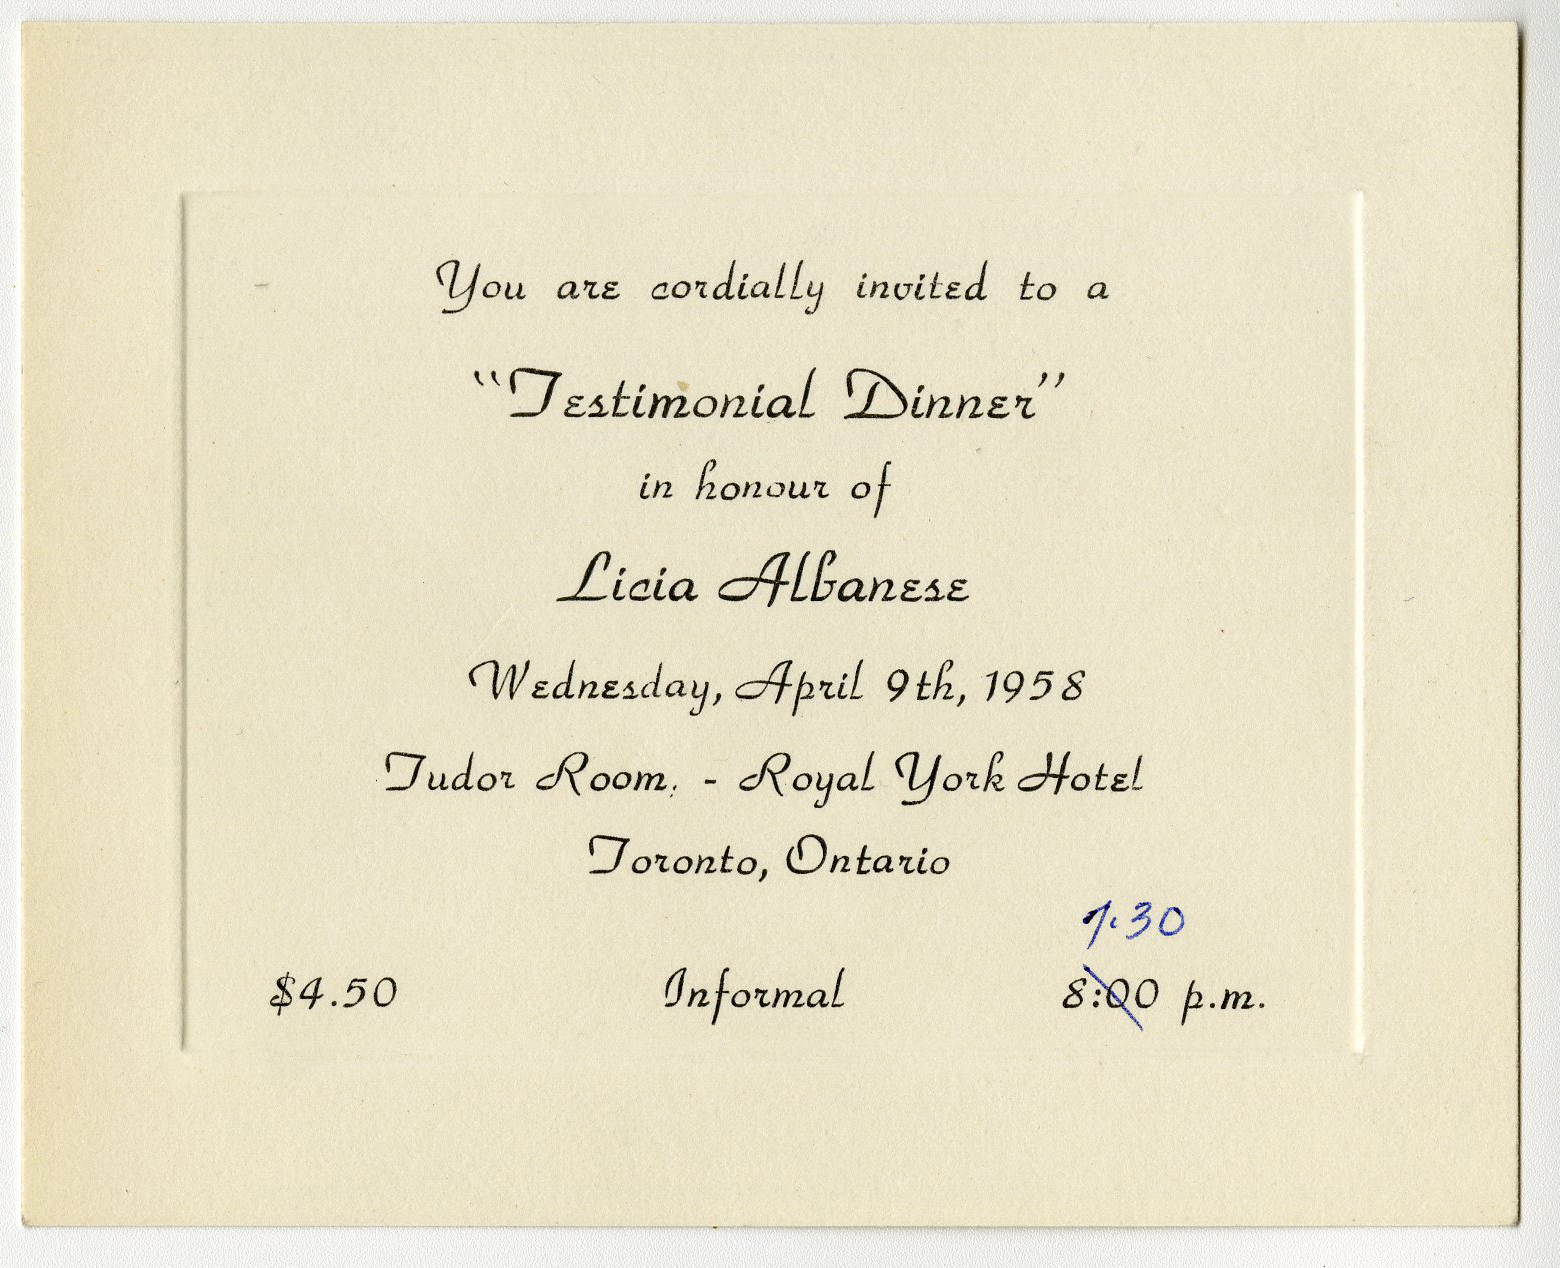 A white card invitation with information about Lucia Albanese's testimonial dinner.